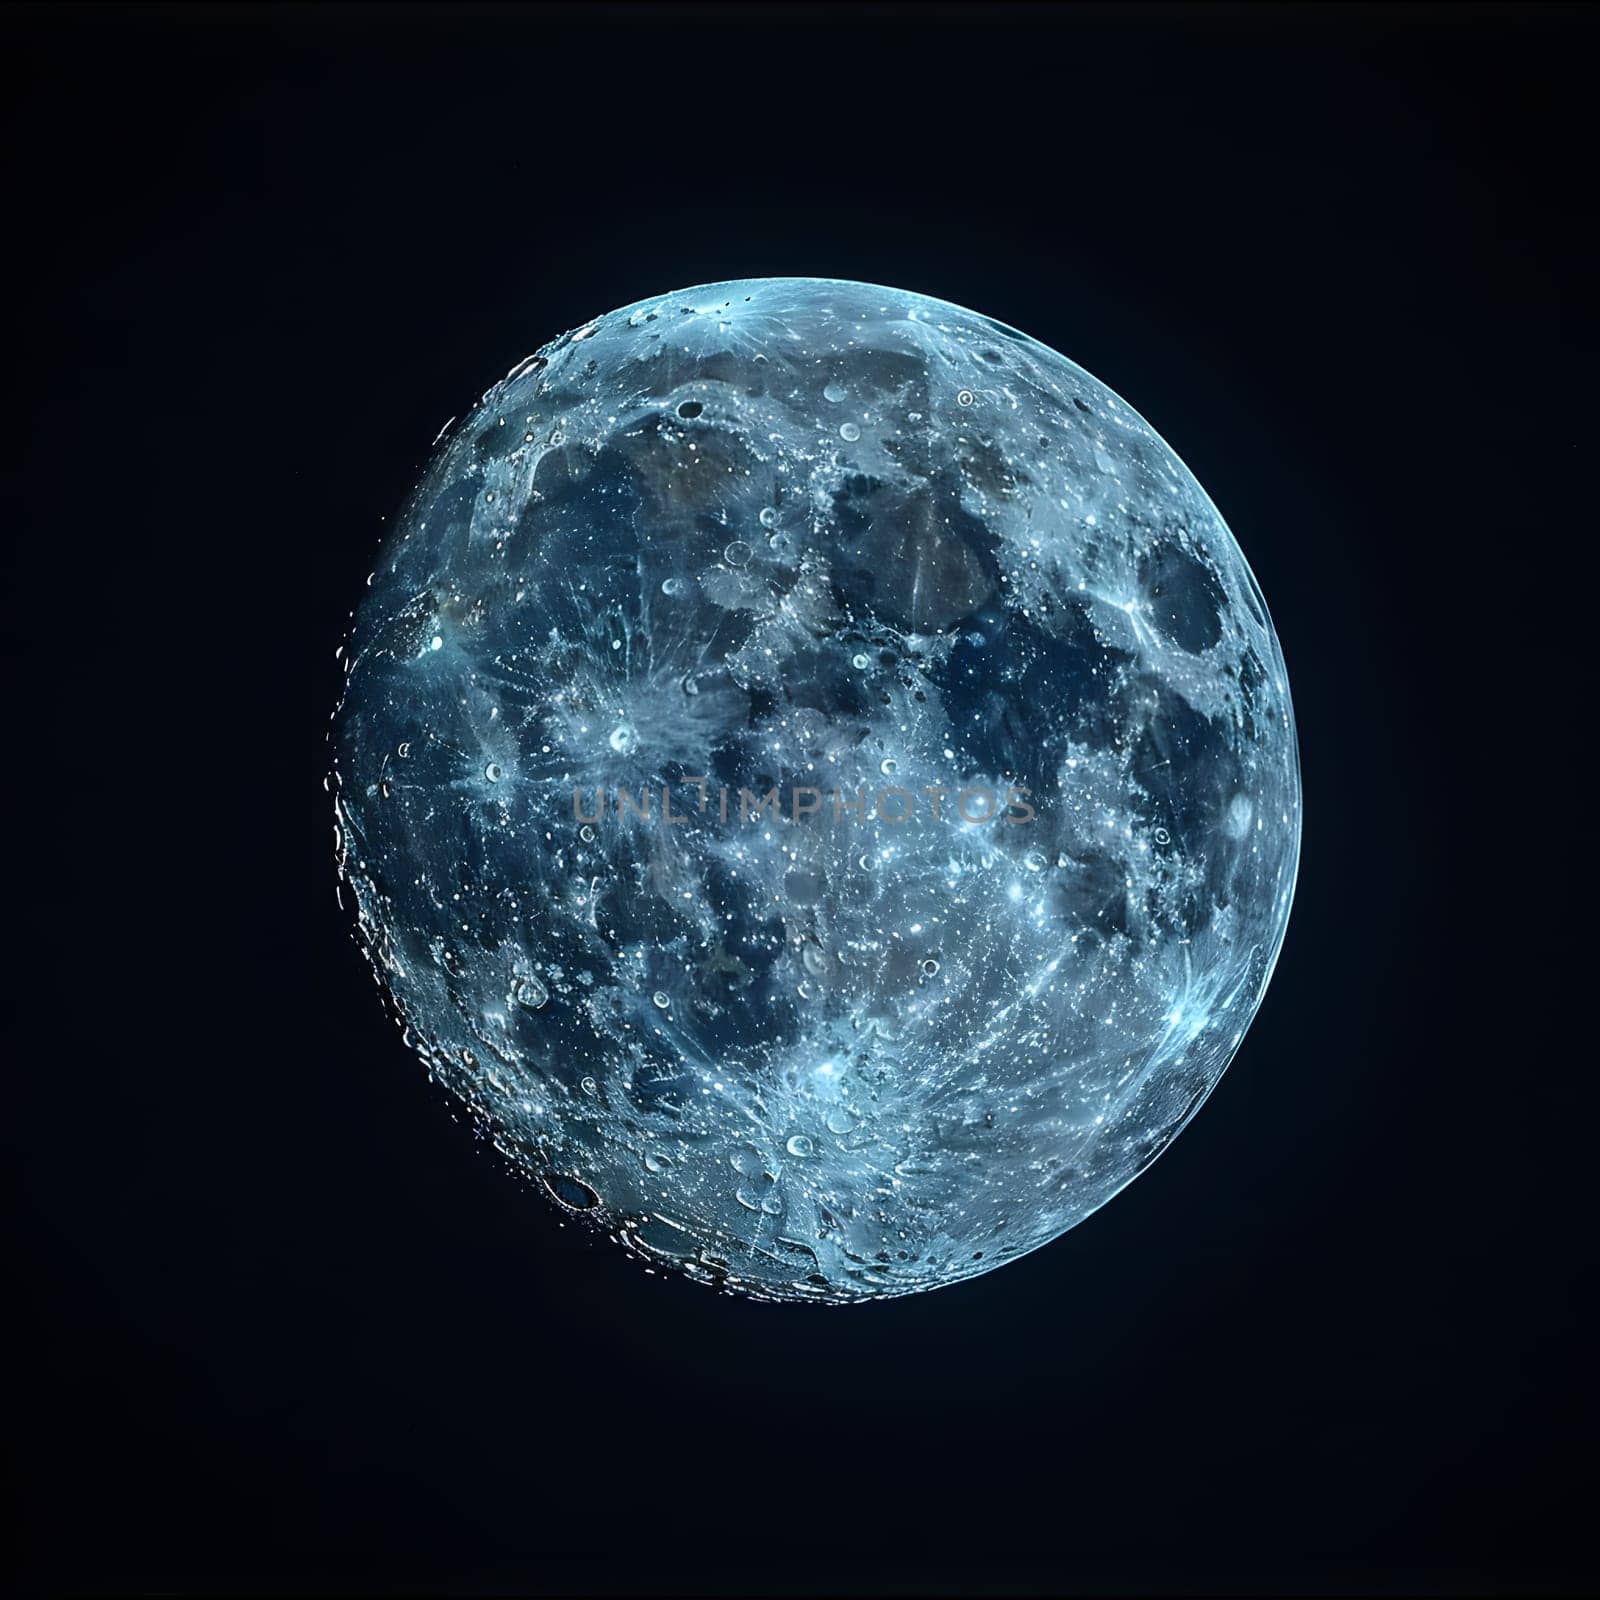 The full Moon, an astronomical object, is visible in the electric blue sky at night, casting its moonlight over the world. A perfect circle of science and wonder